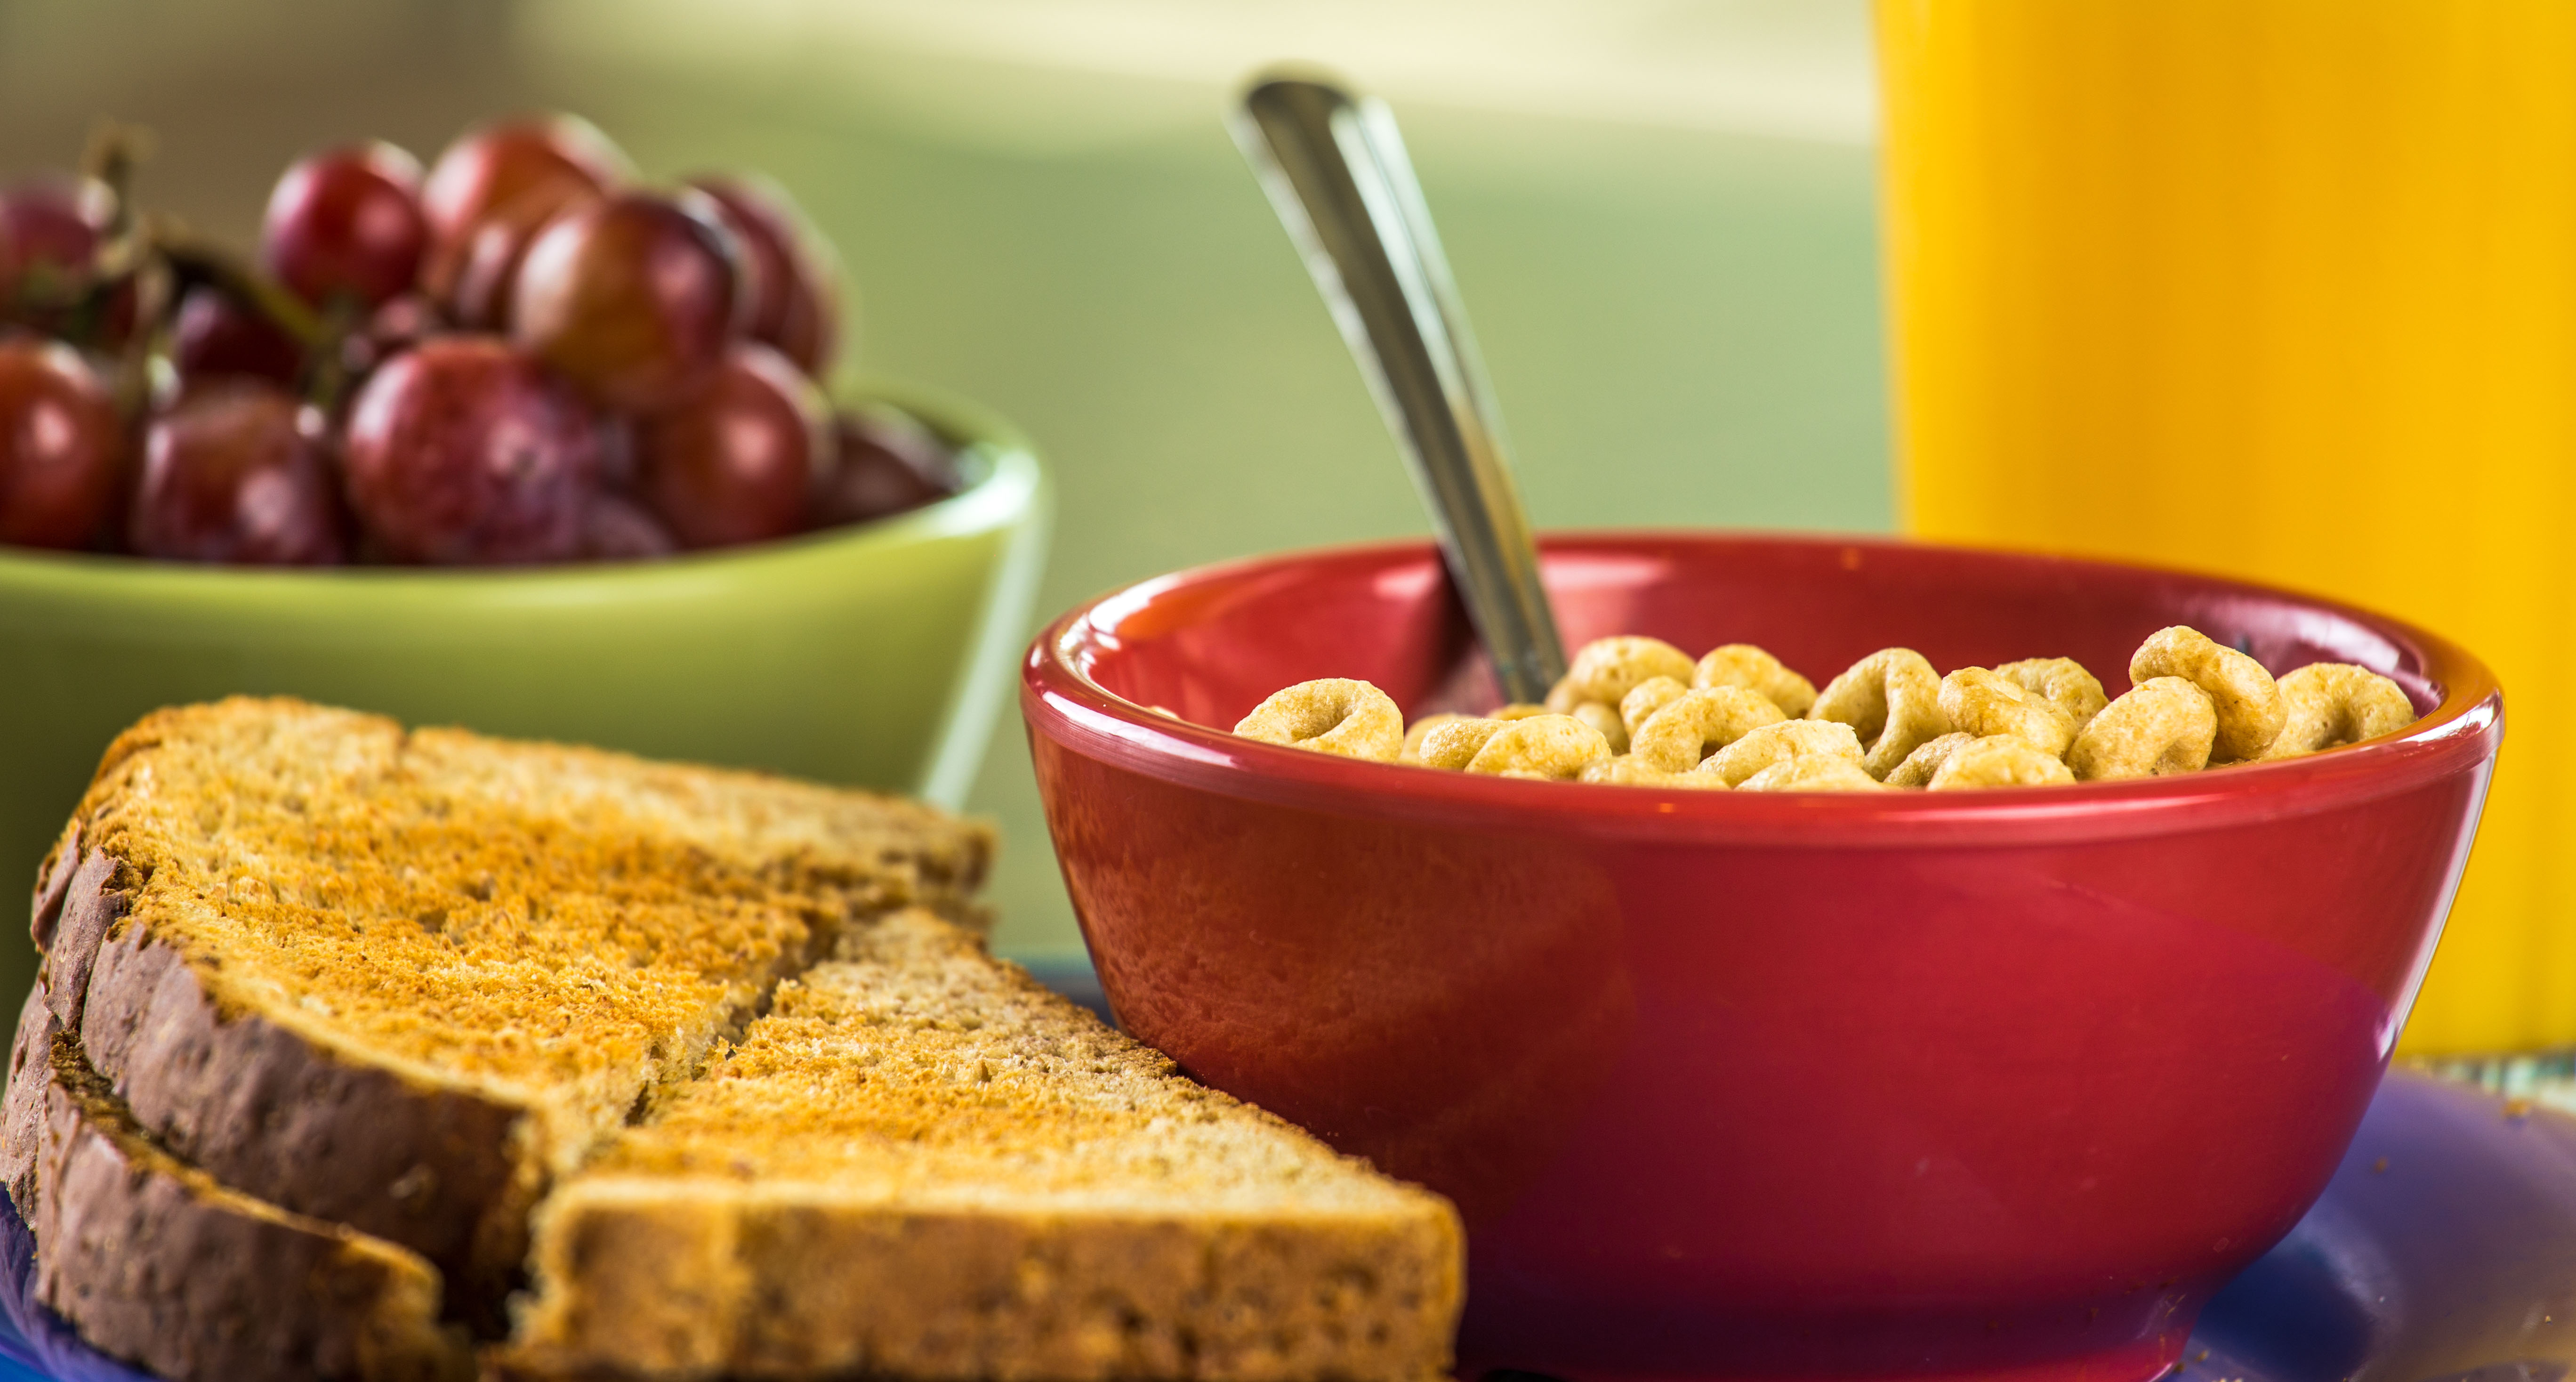 Image of grapes, cereal, toast, and orange juice